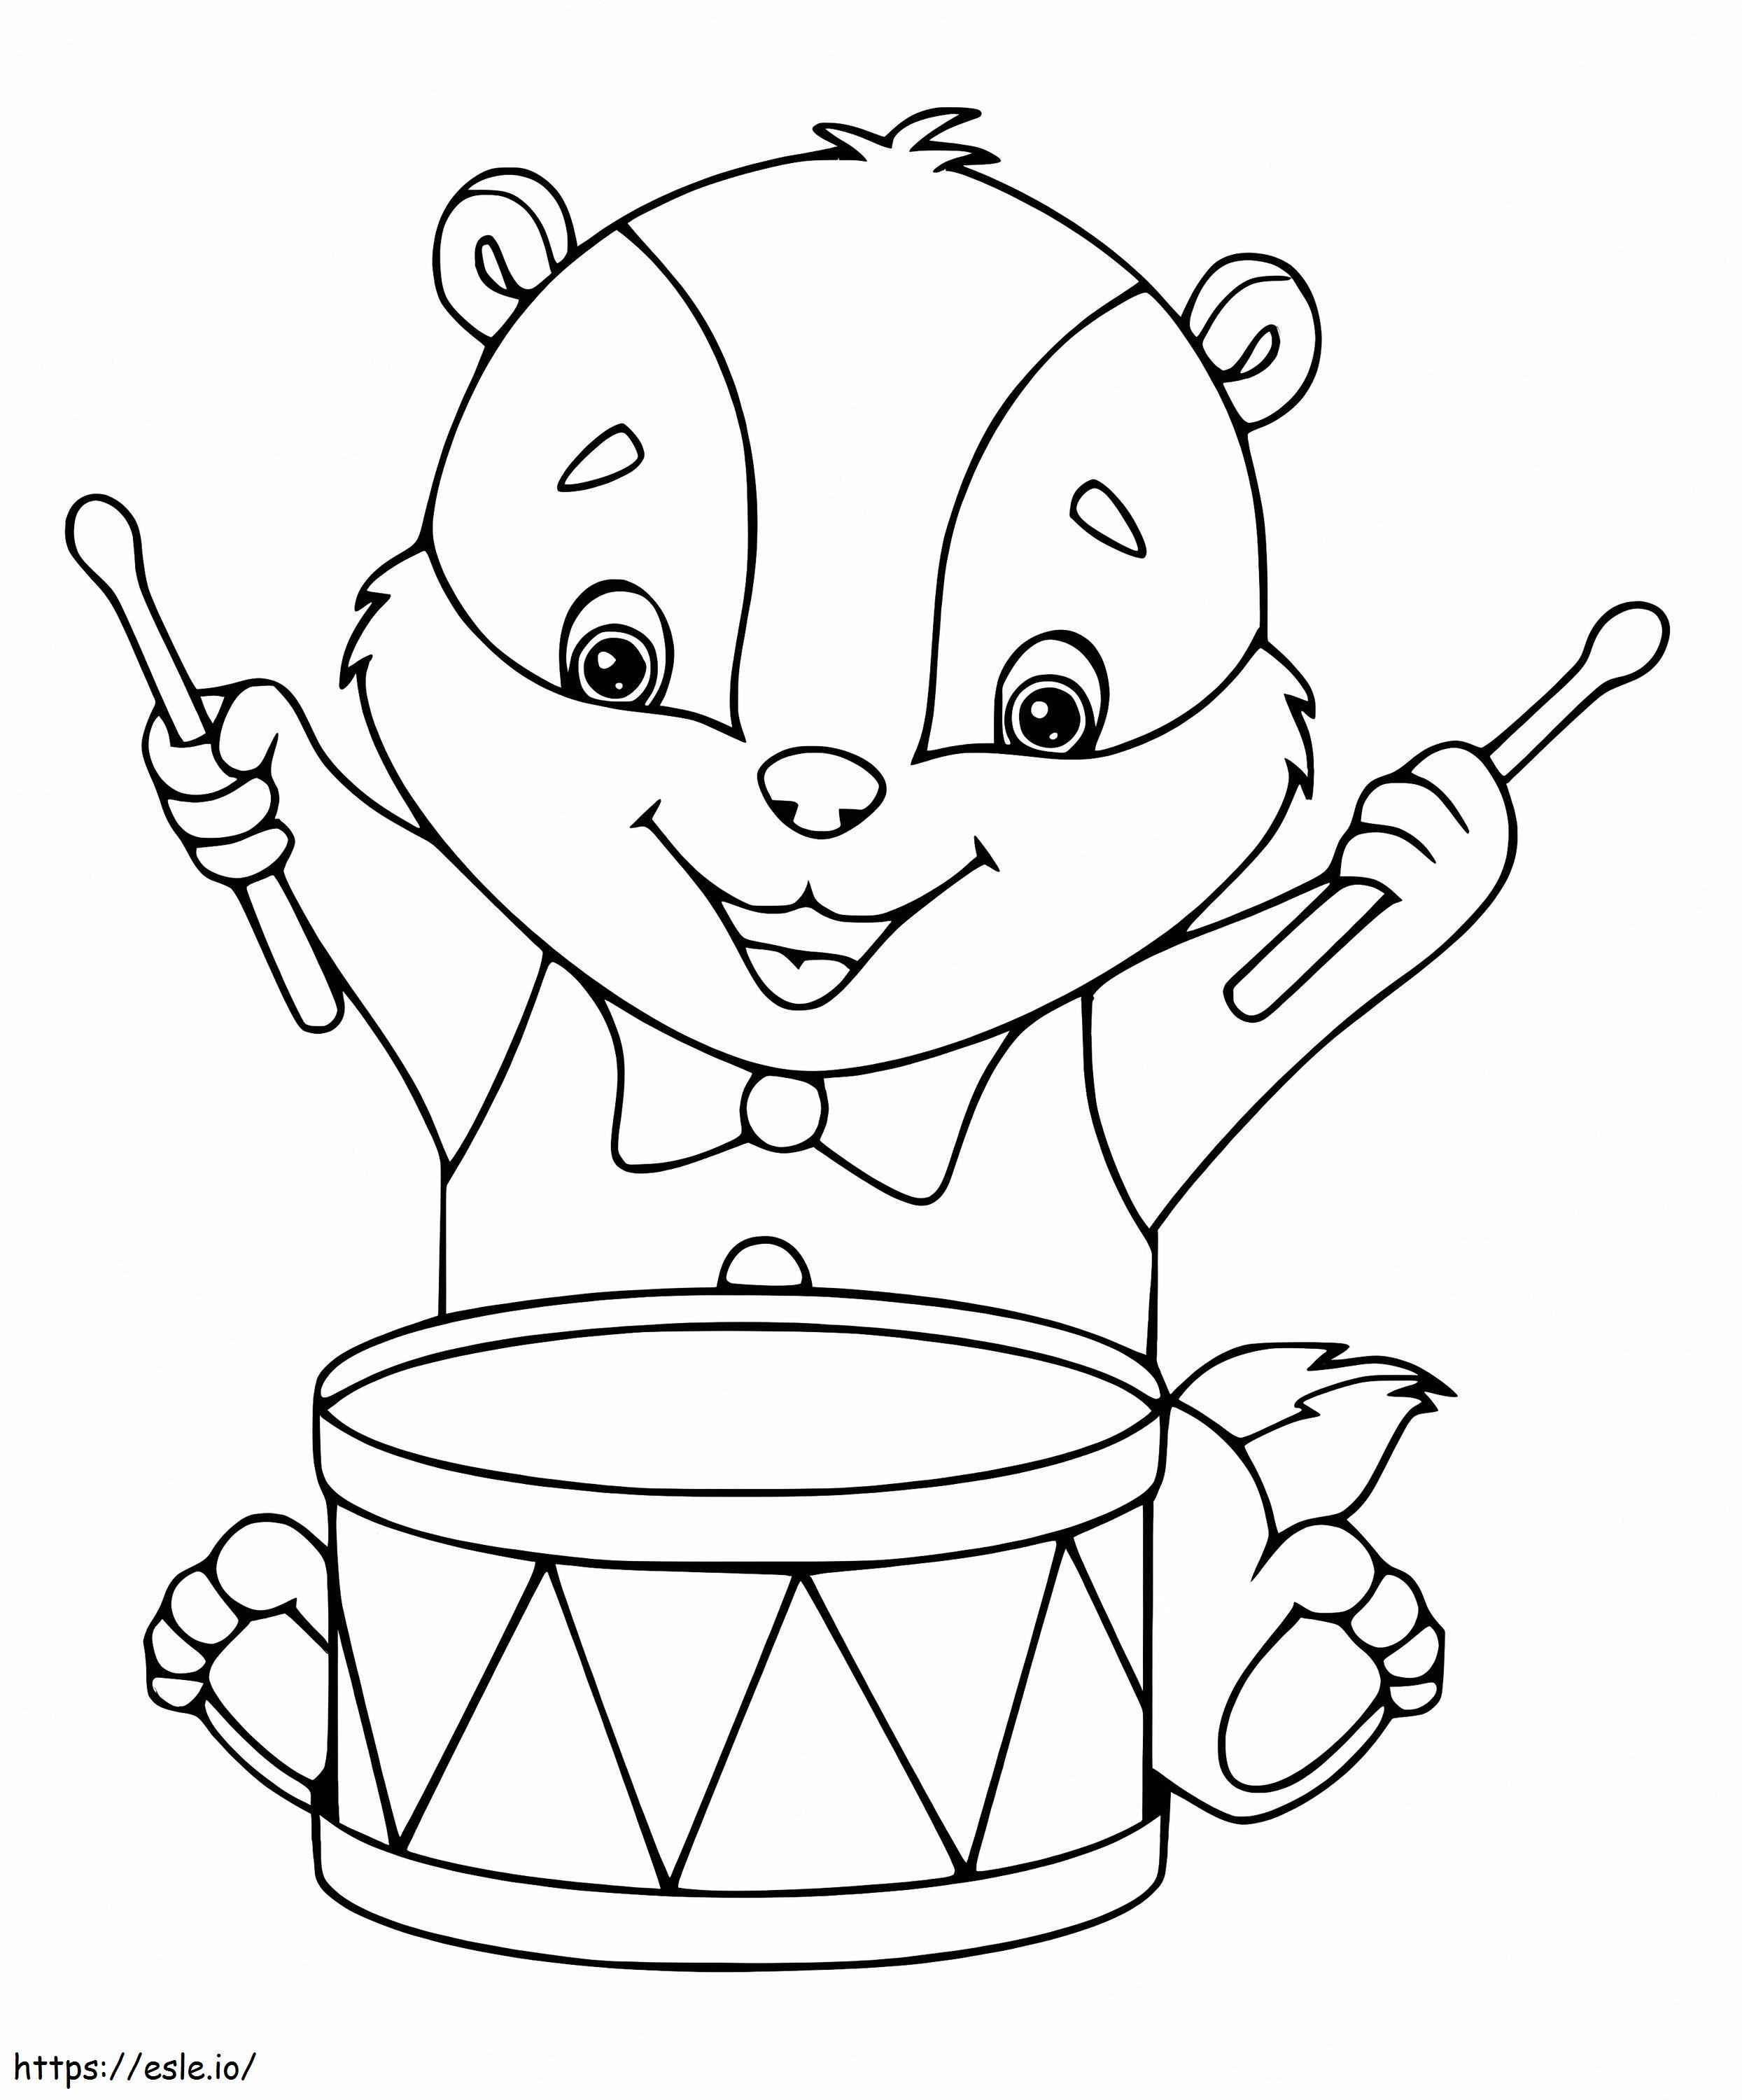 Badger Playing The Drum coloring page